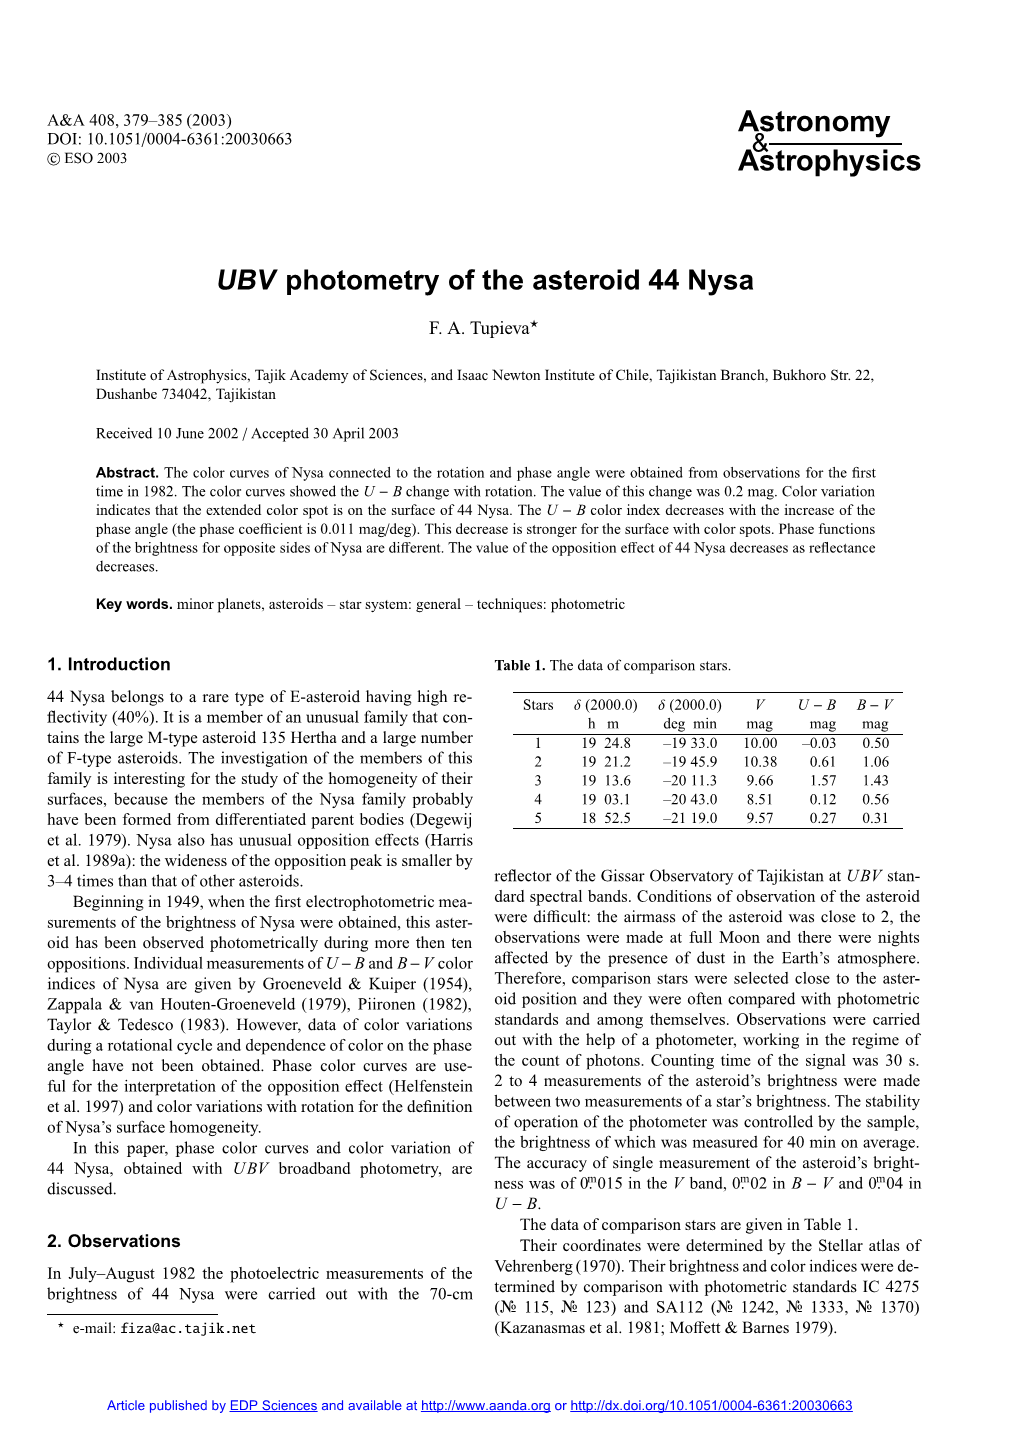 UBV Photometry of the Asteroid 44 Nysa